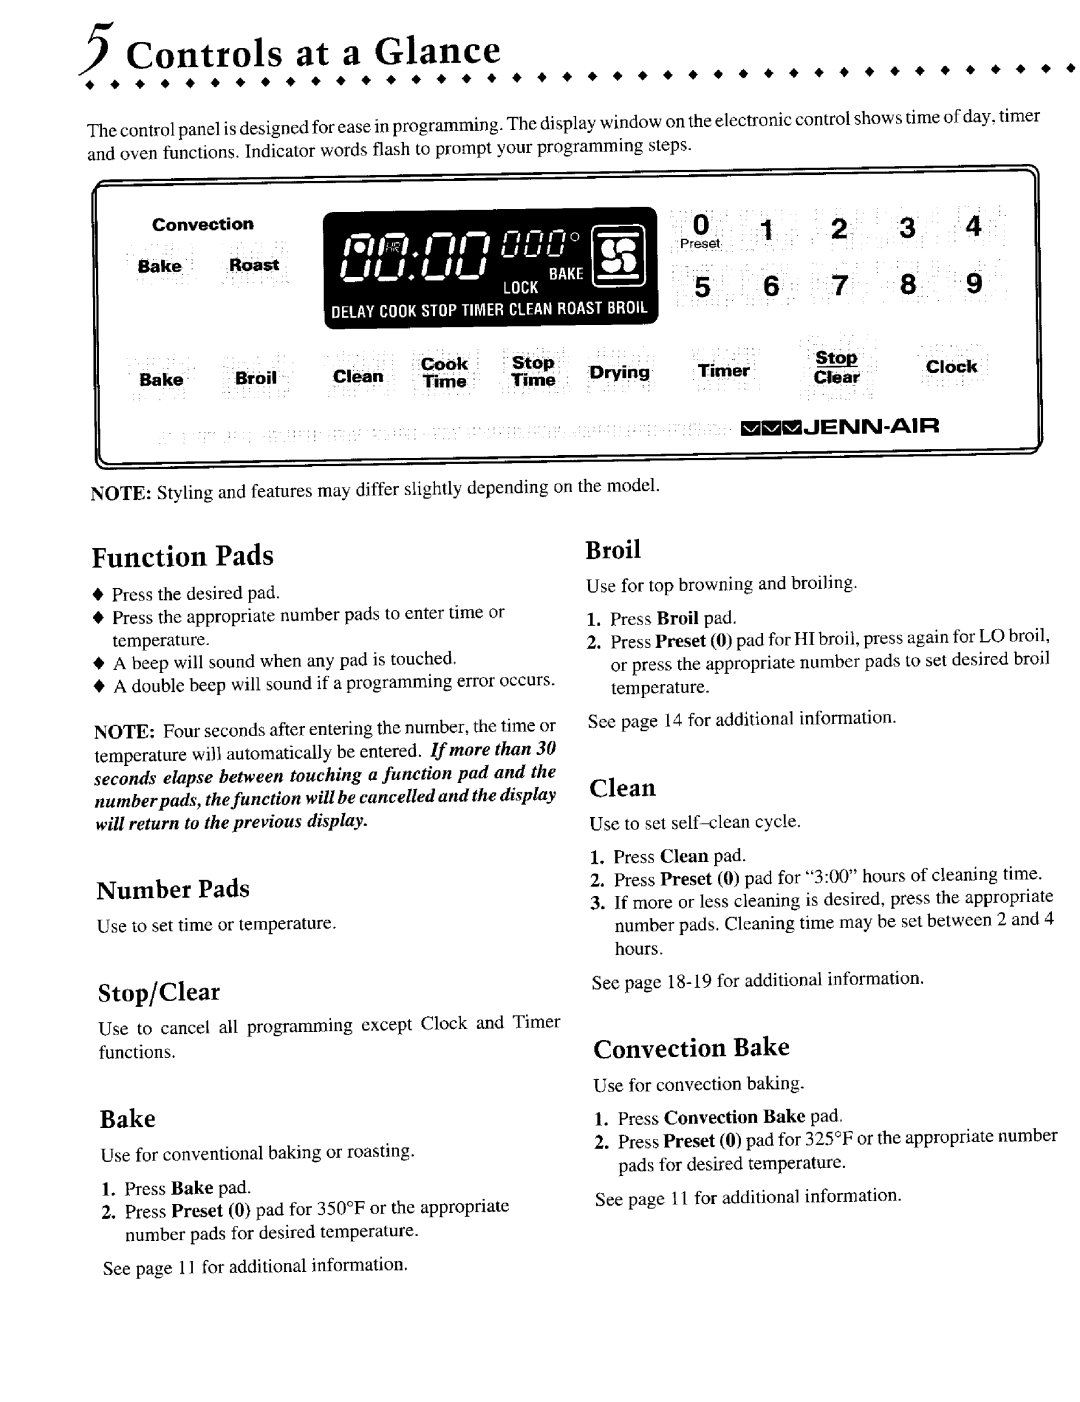 Jenn-Air JER8850 Controls at a Glance, Function Pads, Broil, Number Pads, Stop/Clear, Clean, Convection Bake, +CoOk 